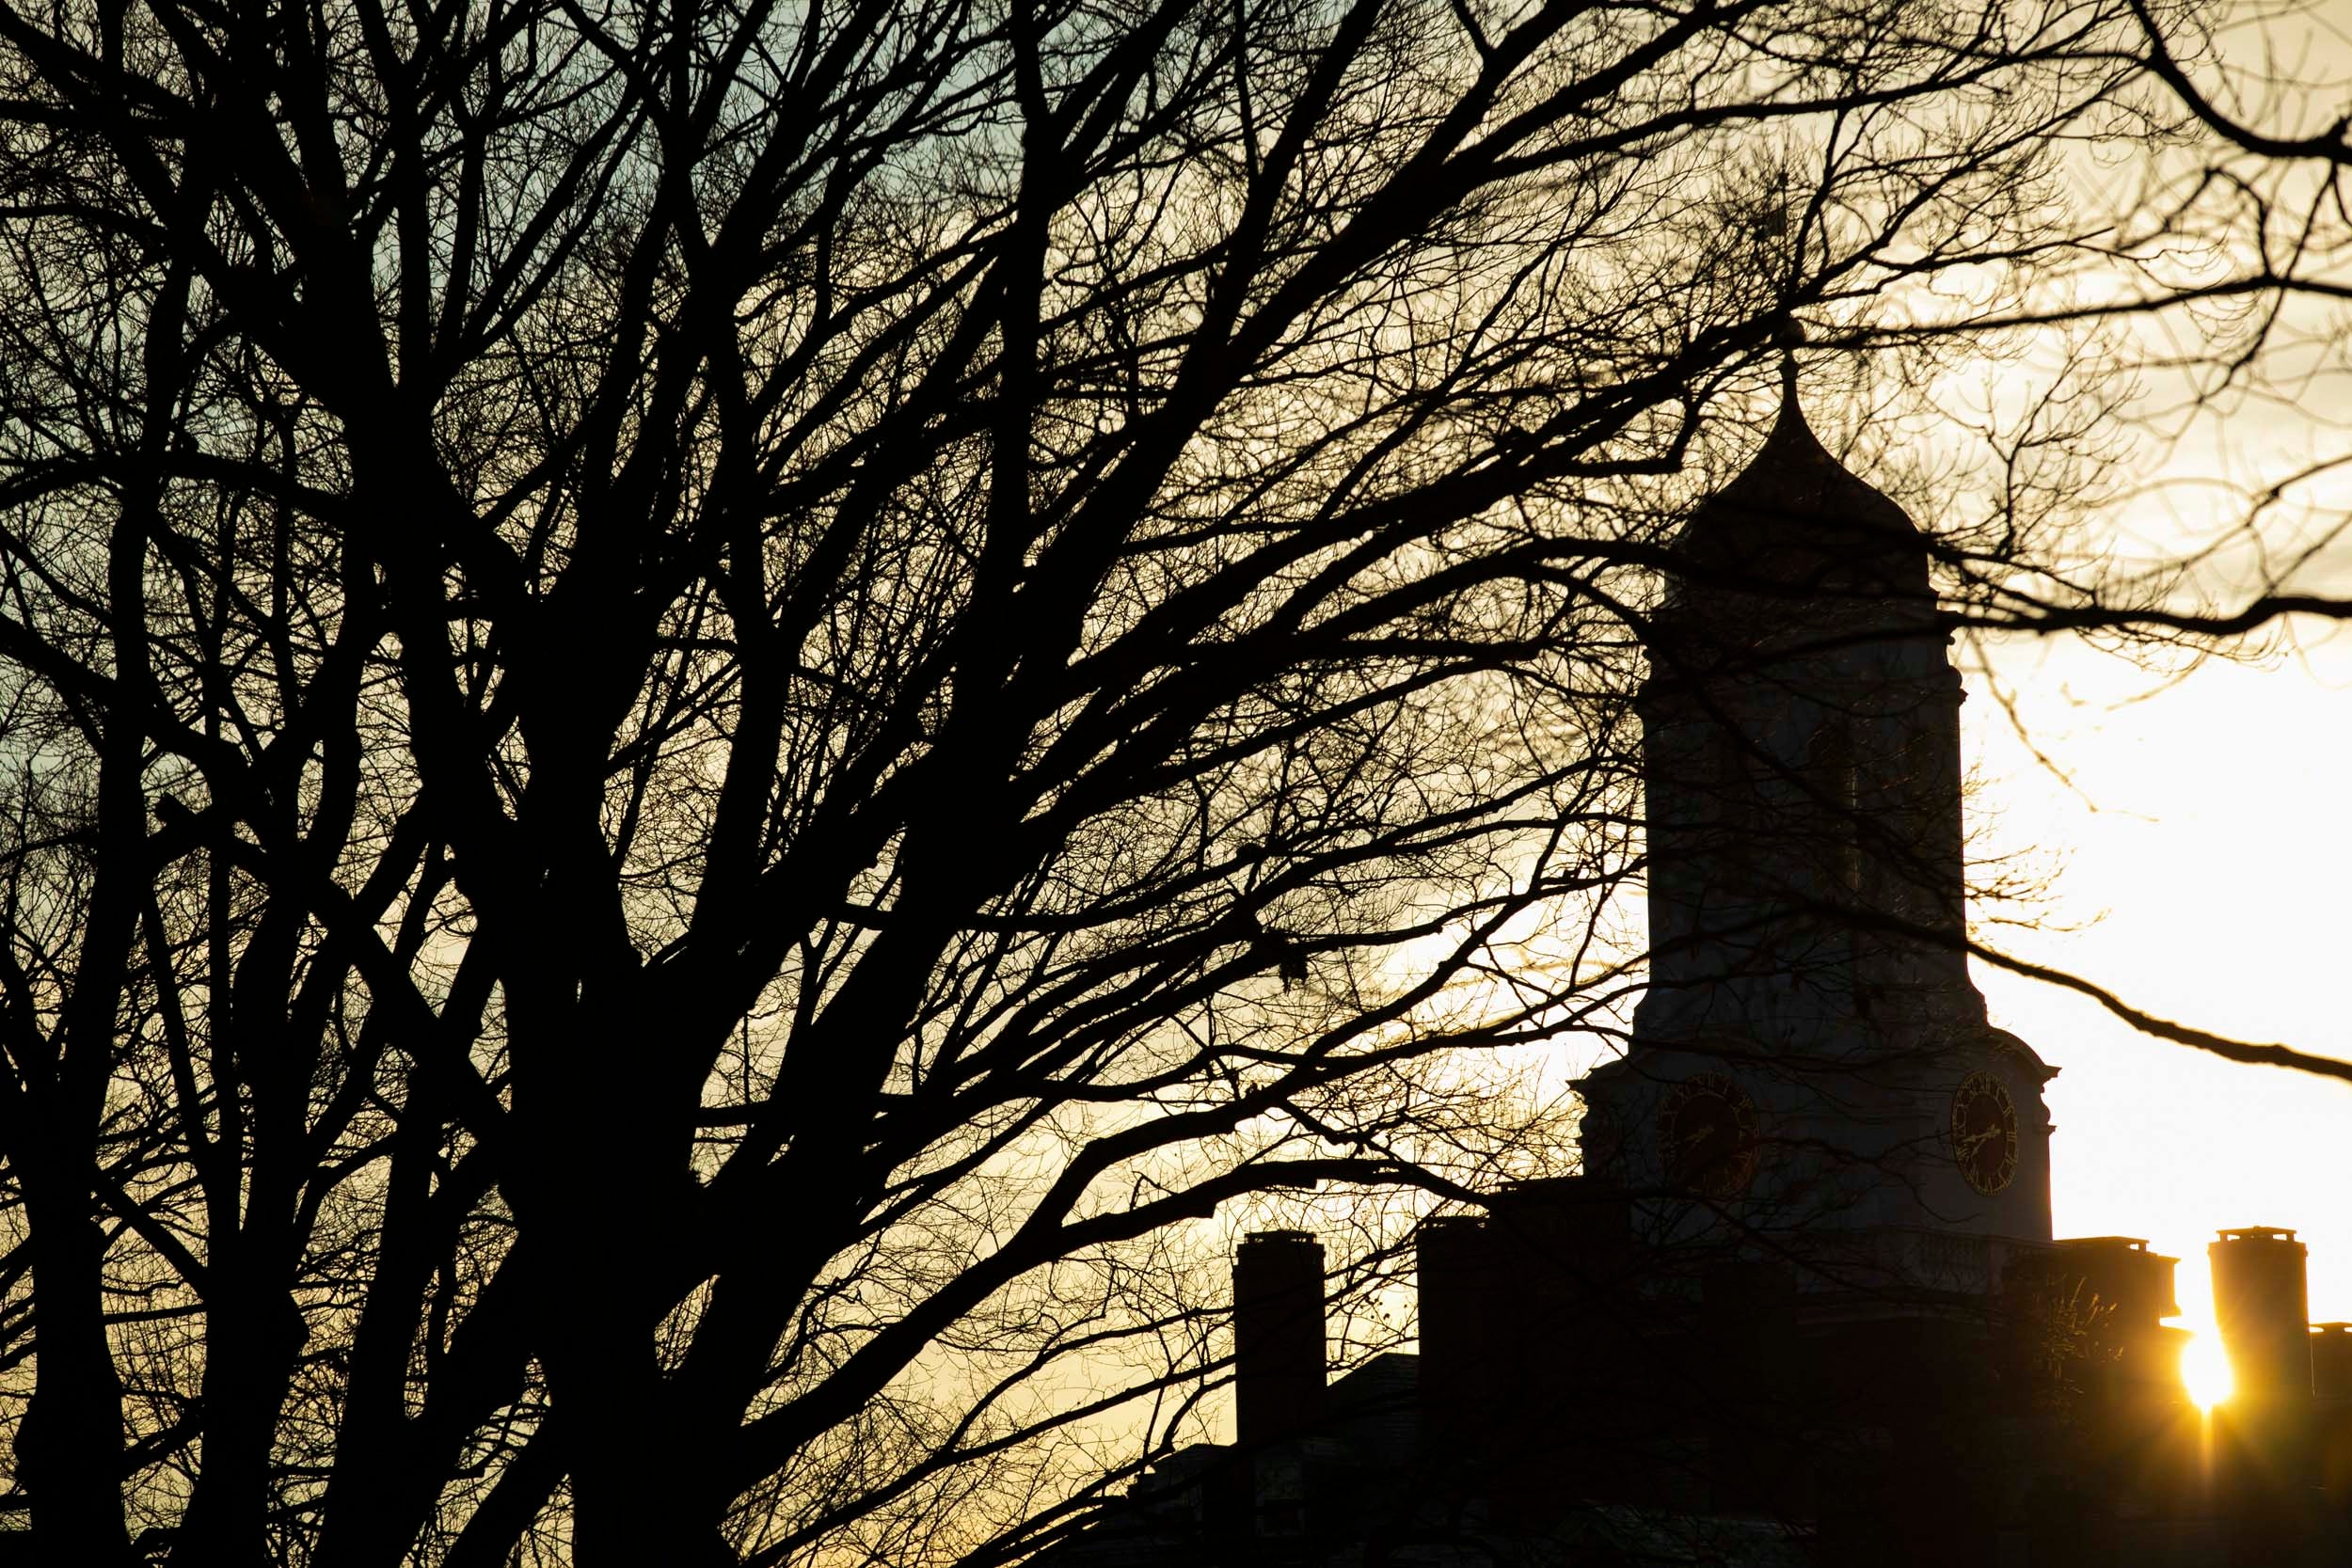 The Dunster House Tower is pictured at sunrise.